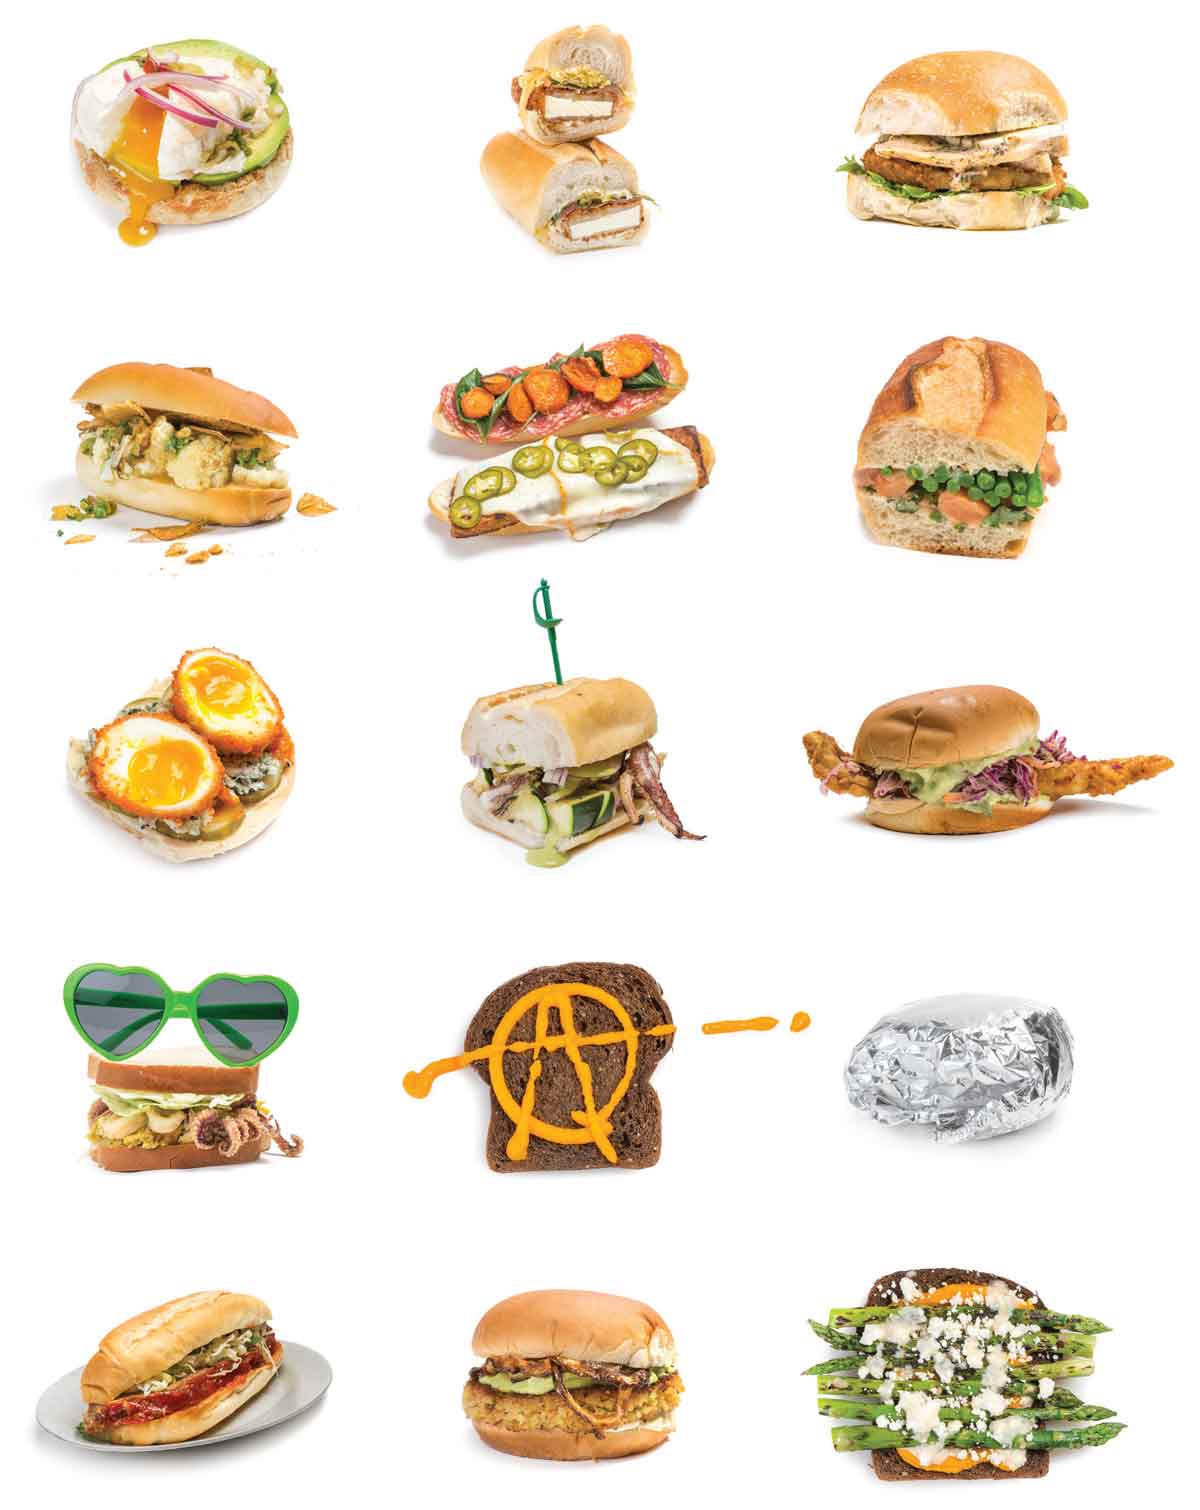 A grid of 15 perfect sandwiches